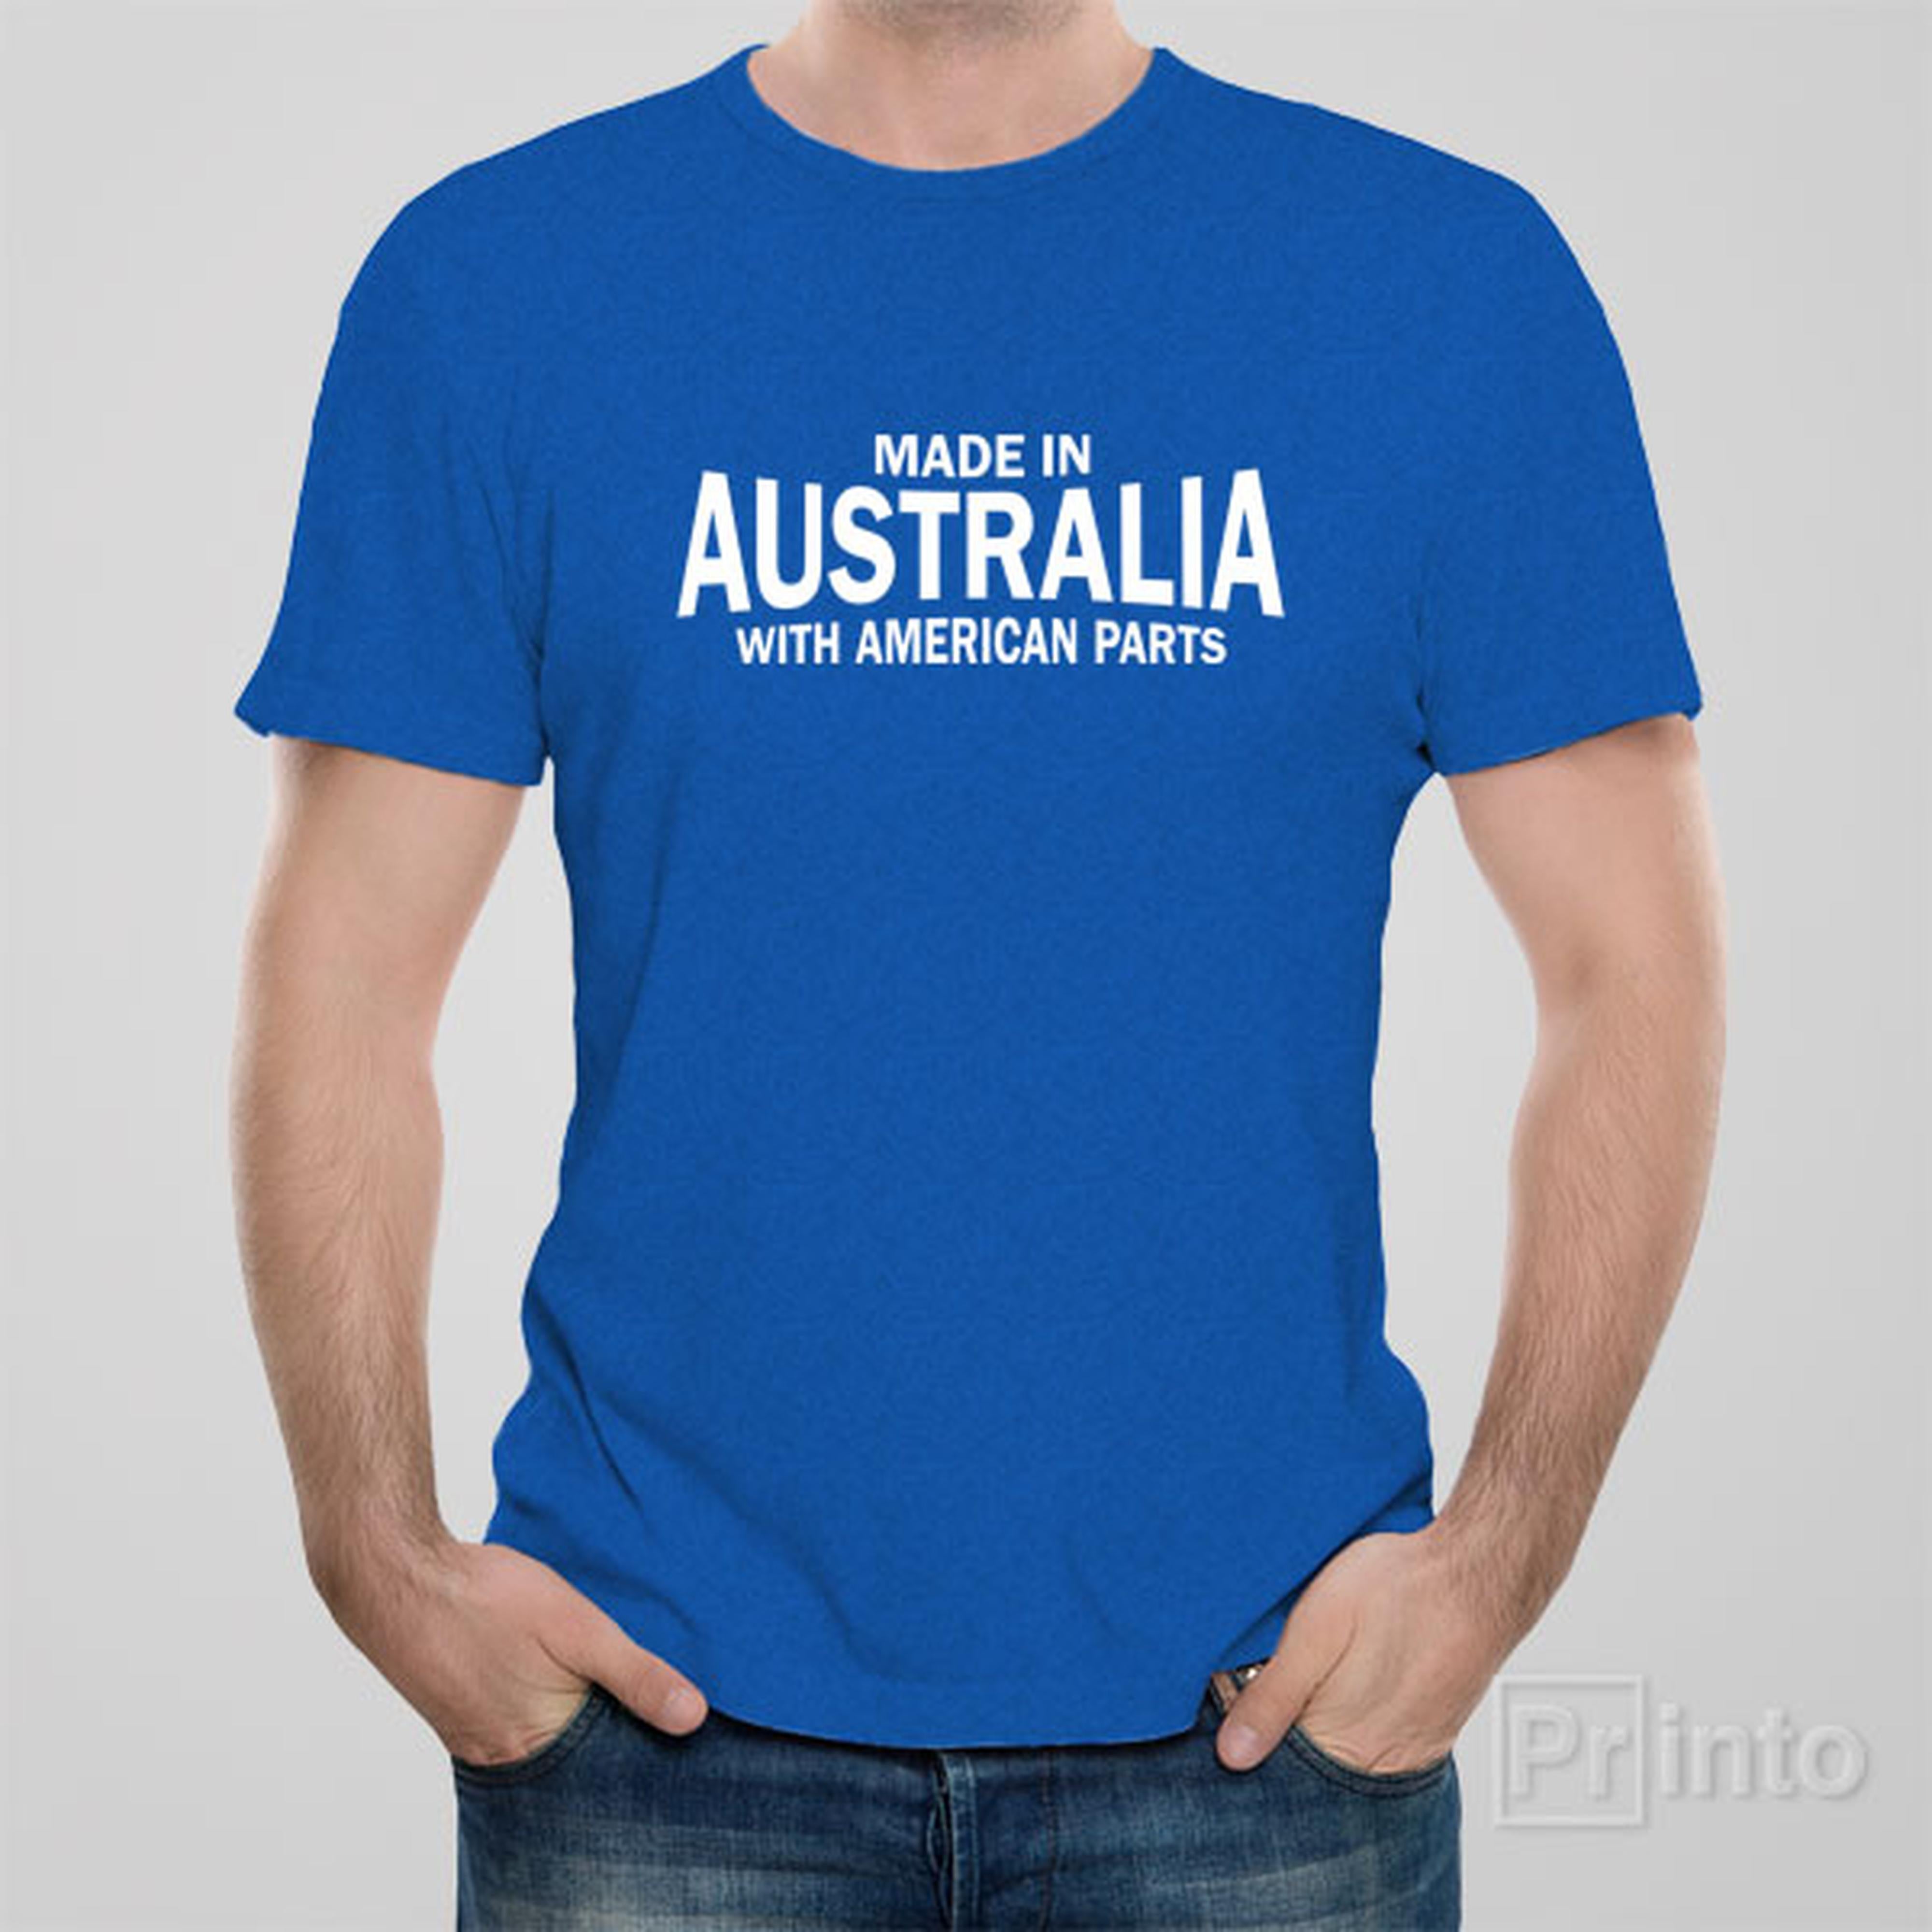 made-in-australia-with-american-parts-t-shirt